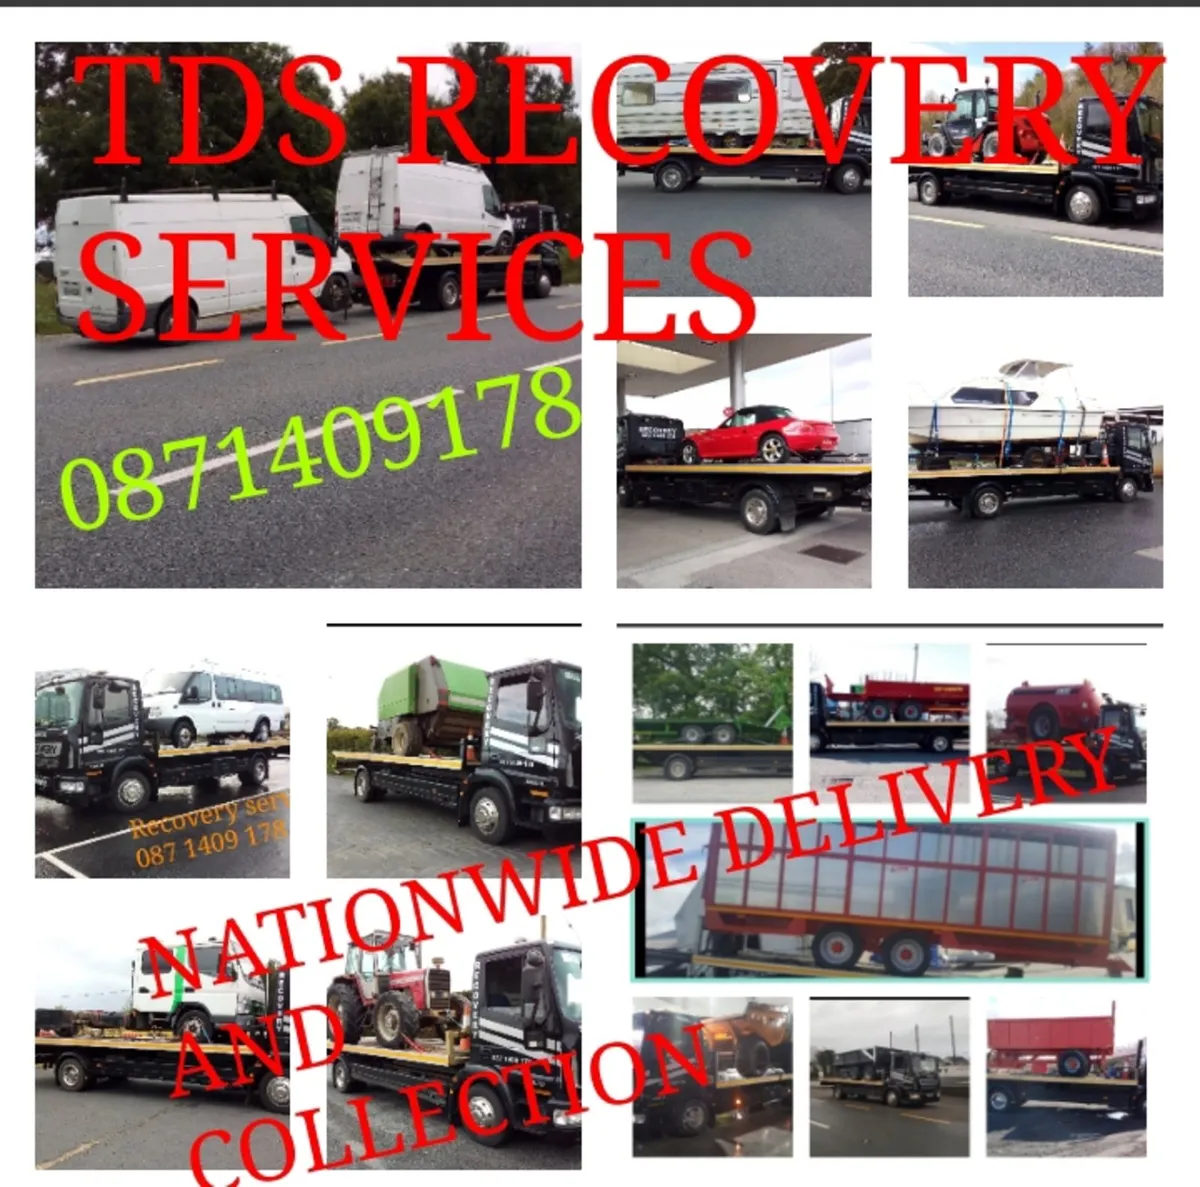 TDS Recovery and Transport services 087 1409 178